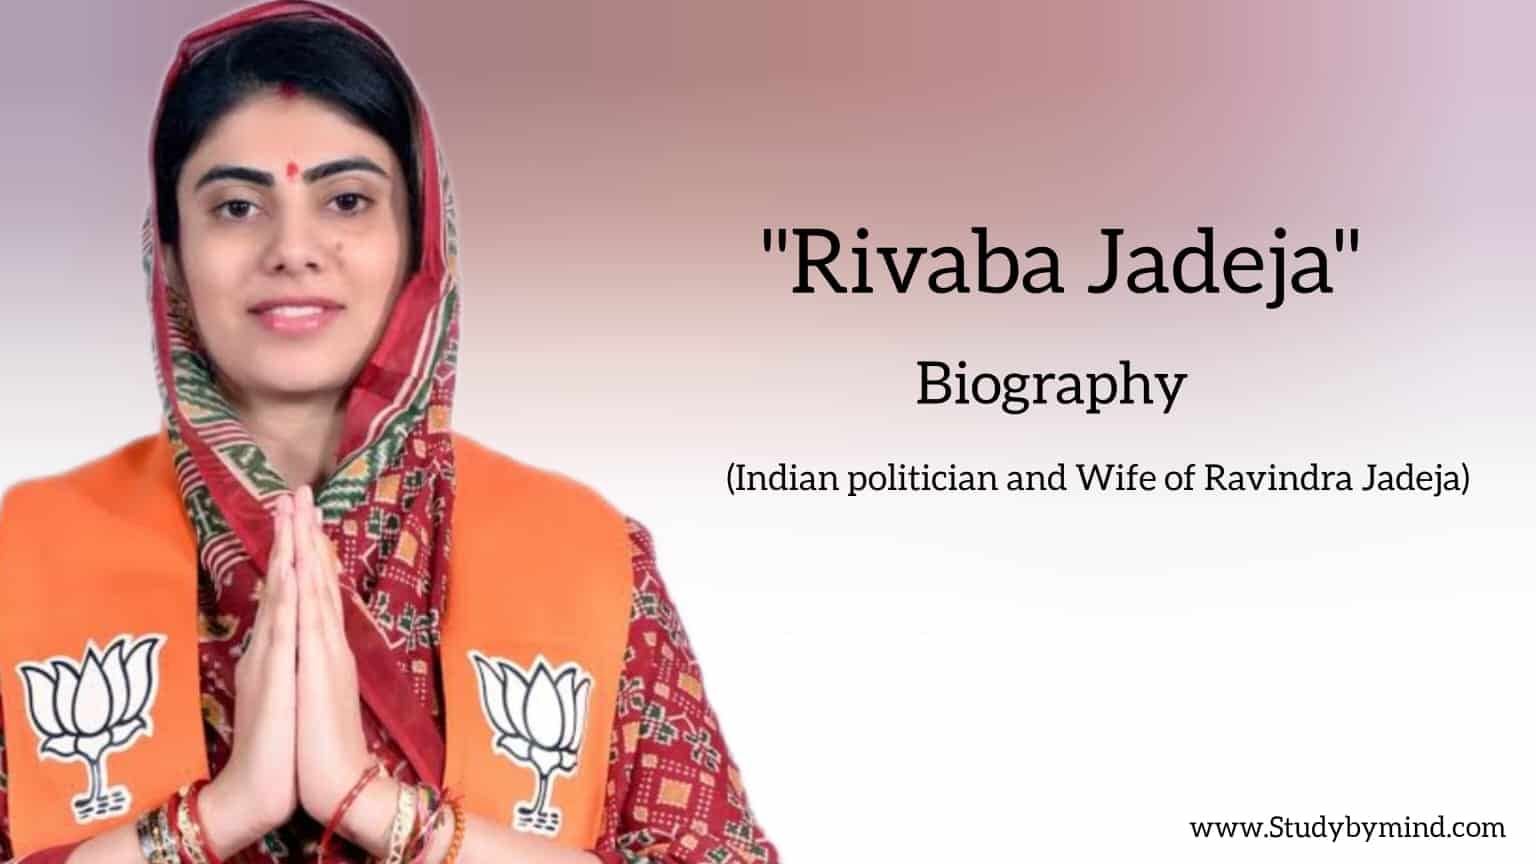 You are currently viewing Rivaba Jadeja biography in English (Indian politician and wife of Ravindra Jadeja)